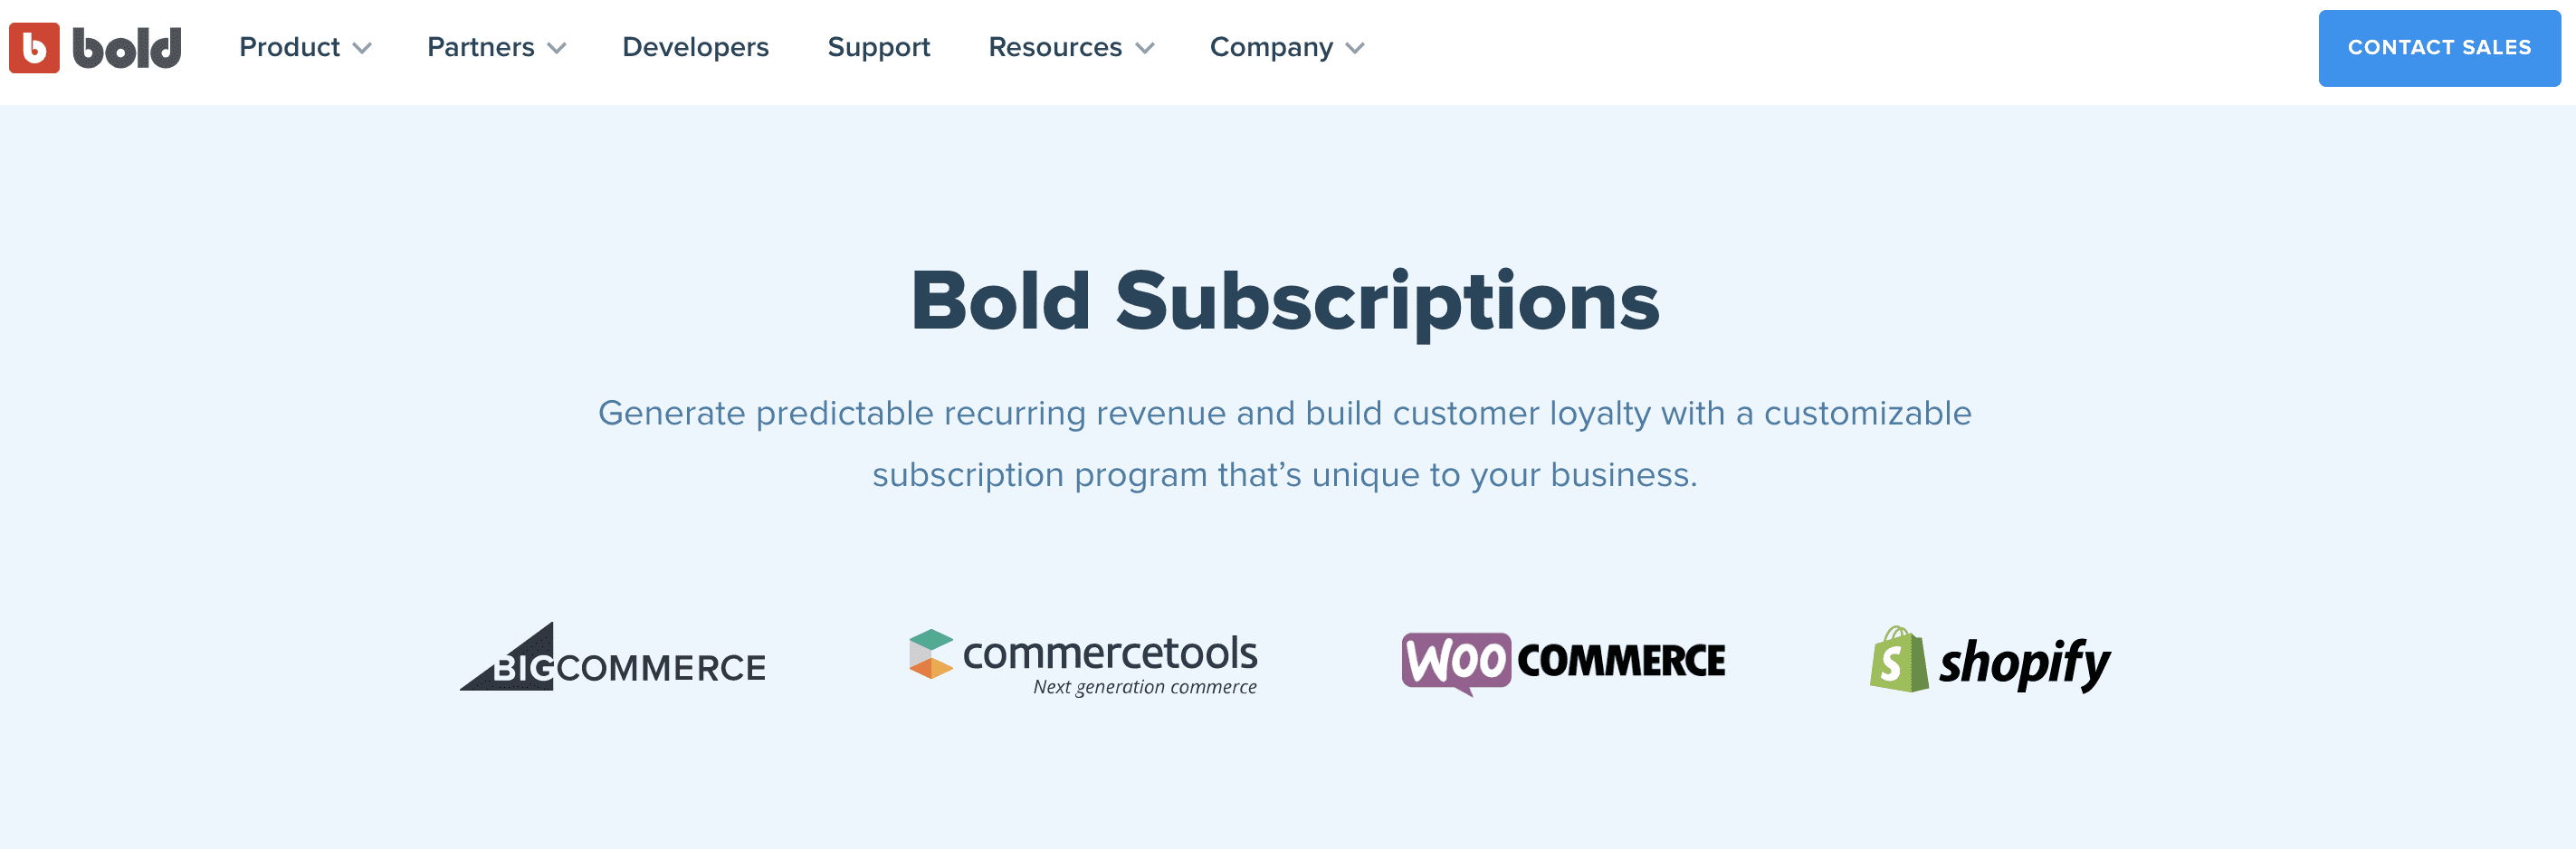 Bold subscriptions